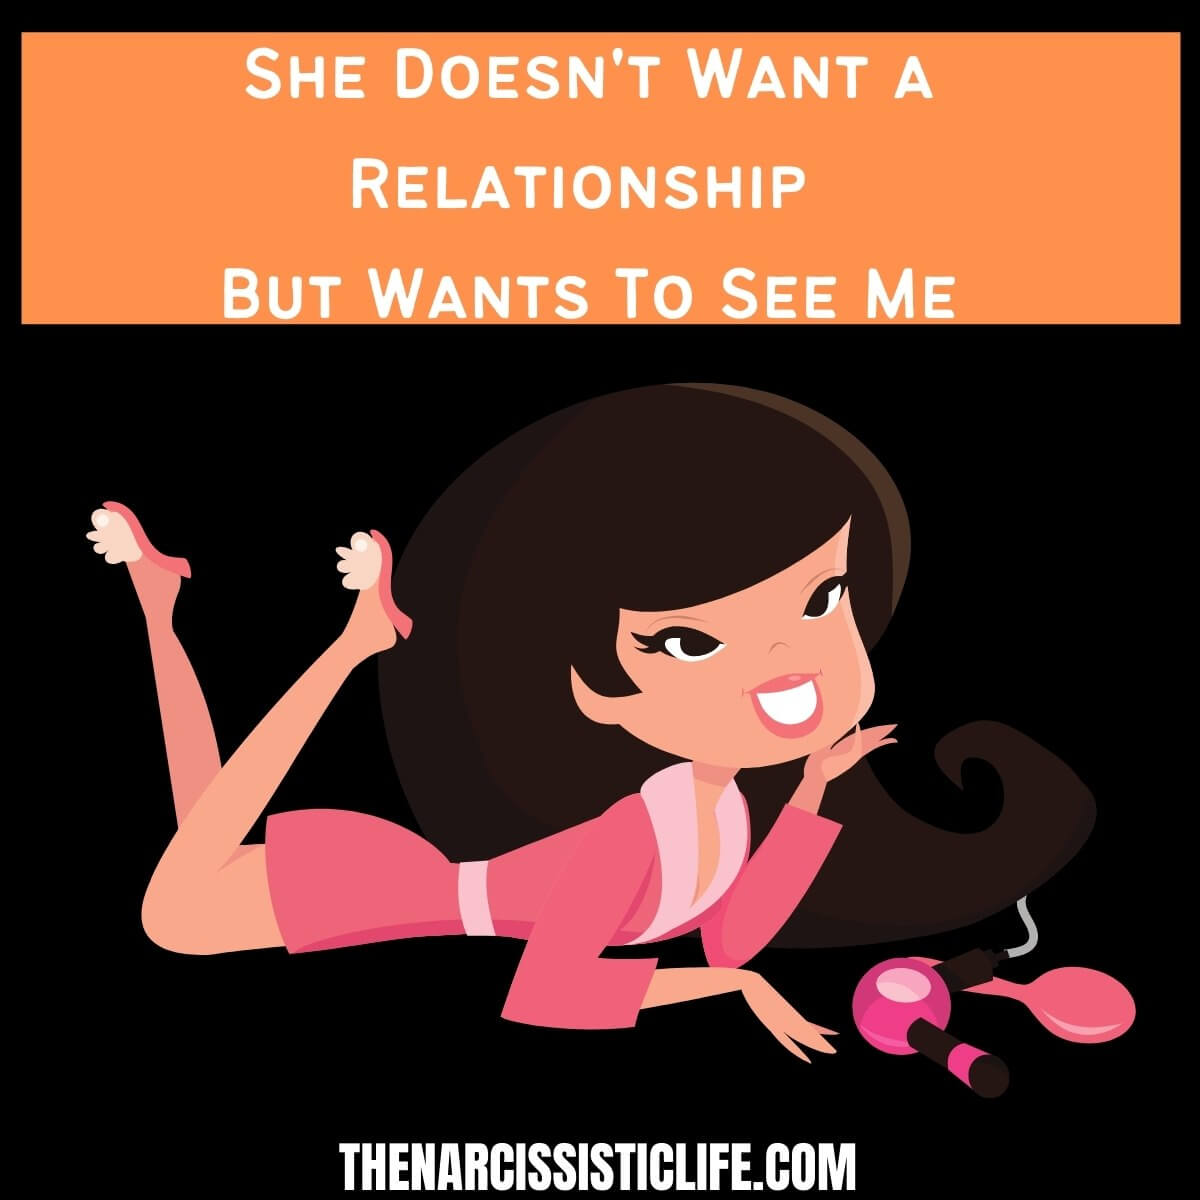 She Doesn't Want a Relationship But Wants To See Me